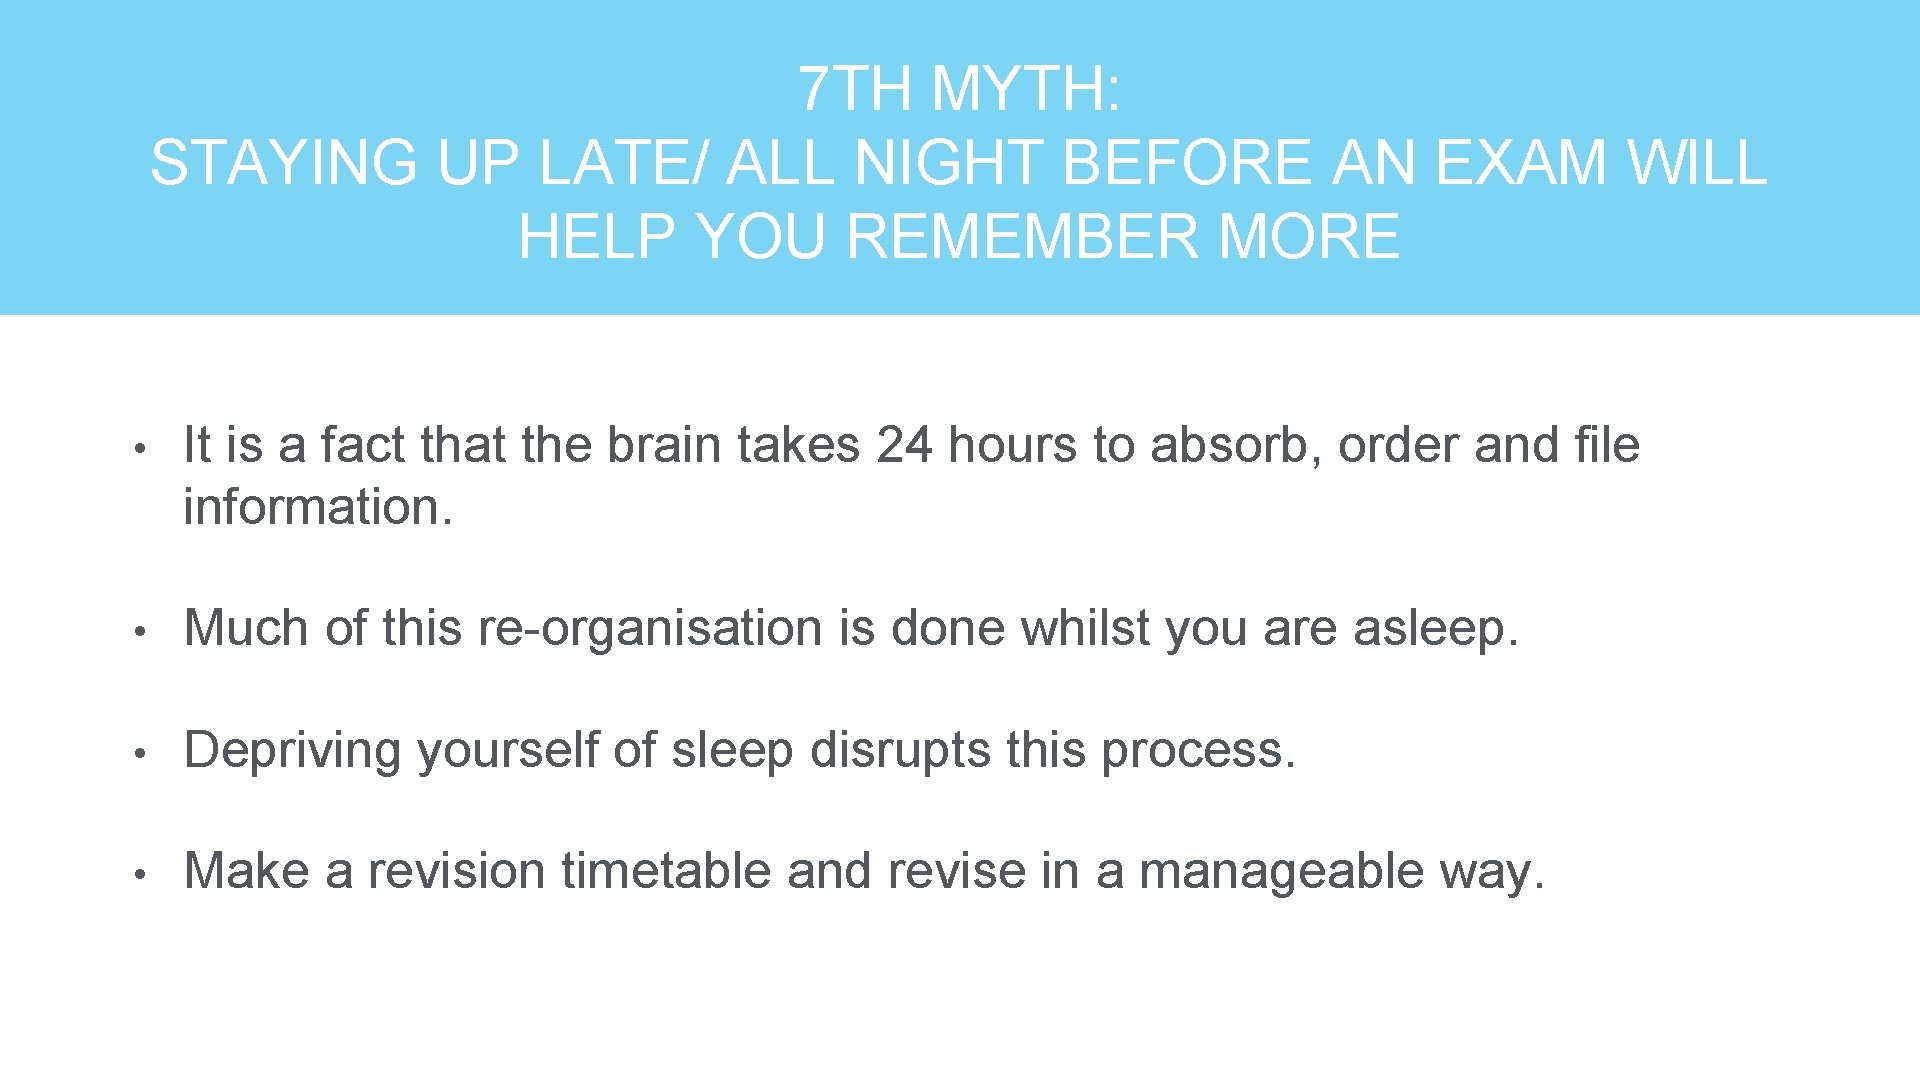 7 TH MYTH: STAYING UP LATE/ ALL NIGHT BEFORE AN EXAM WILL HELP YOU